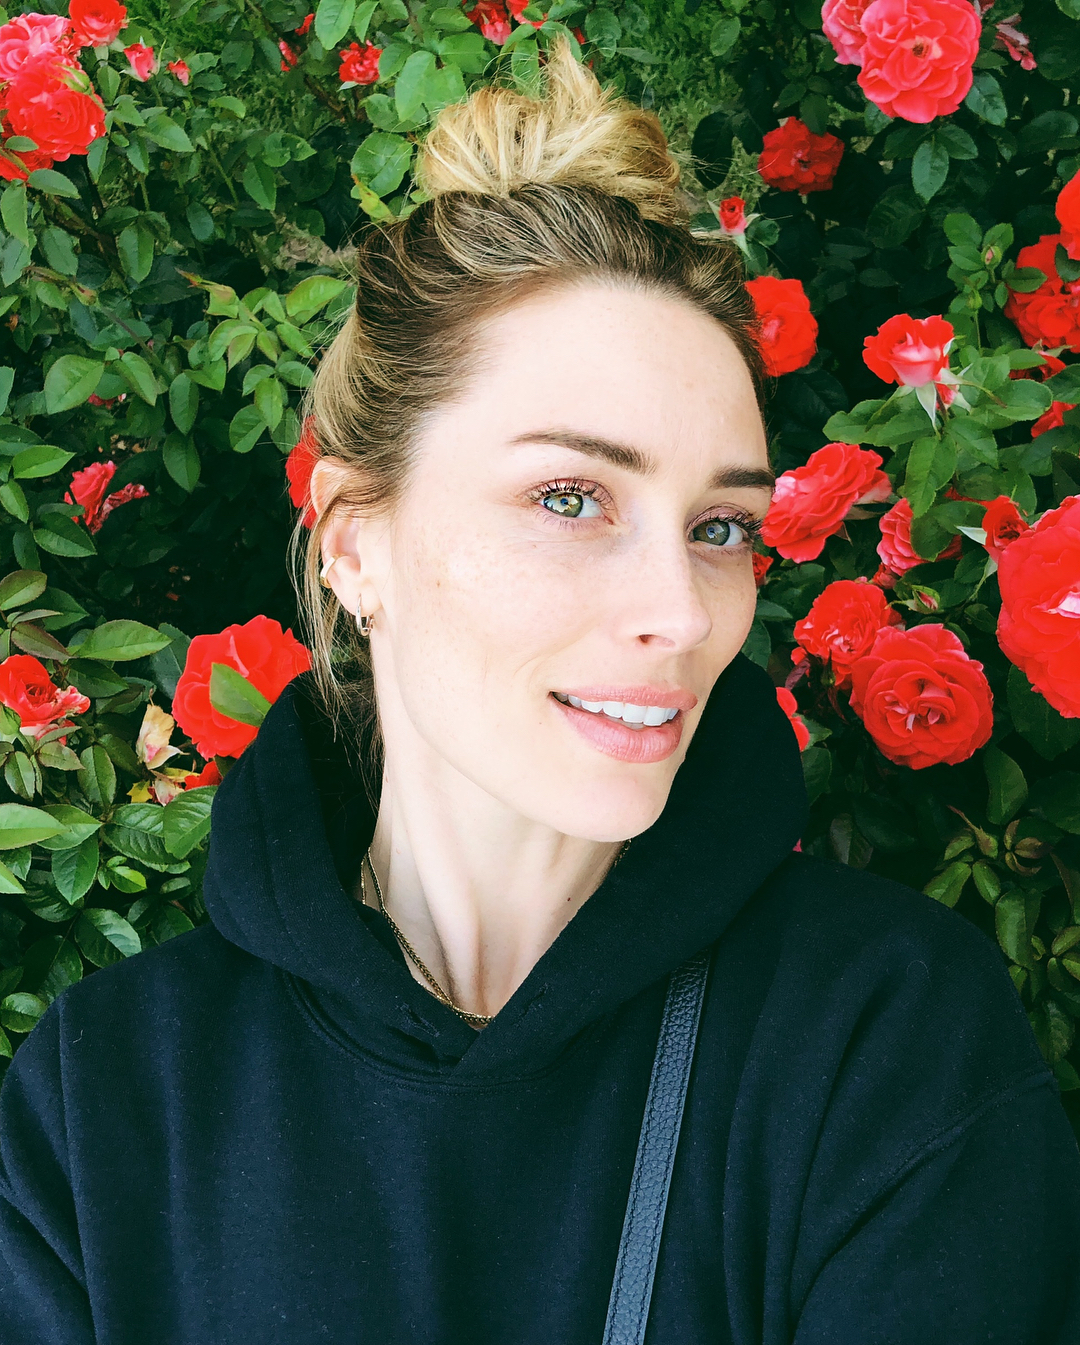 Arielle Vandenberg on Love Island, Clean Beauty, and More | POPSUGAR Beauty